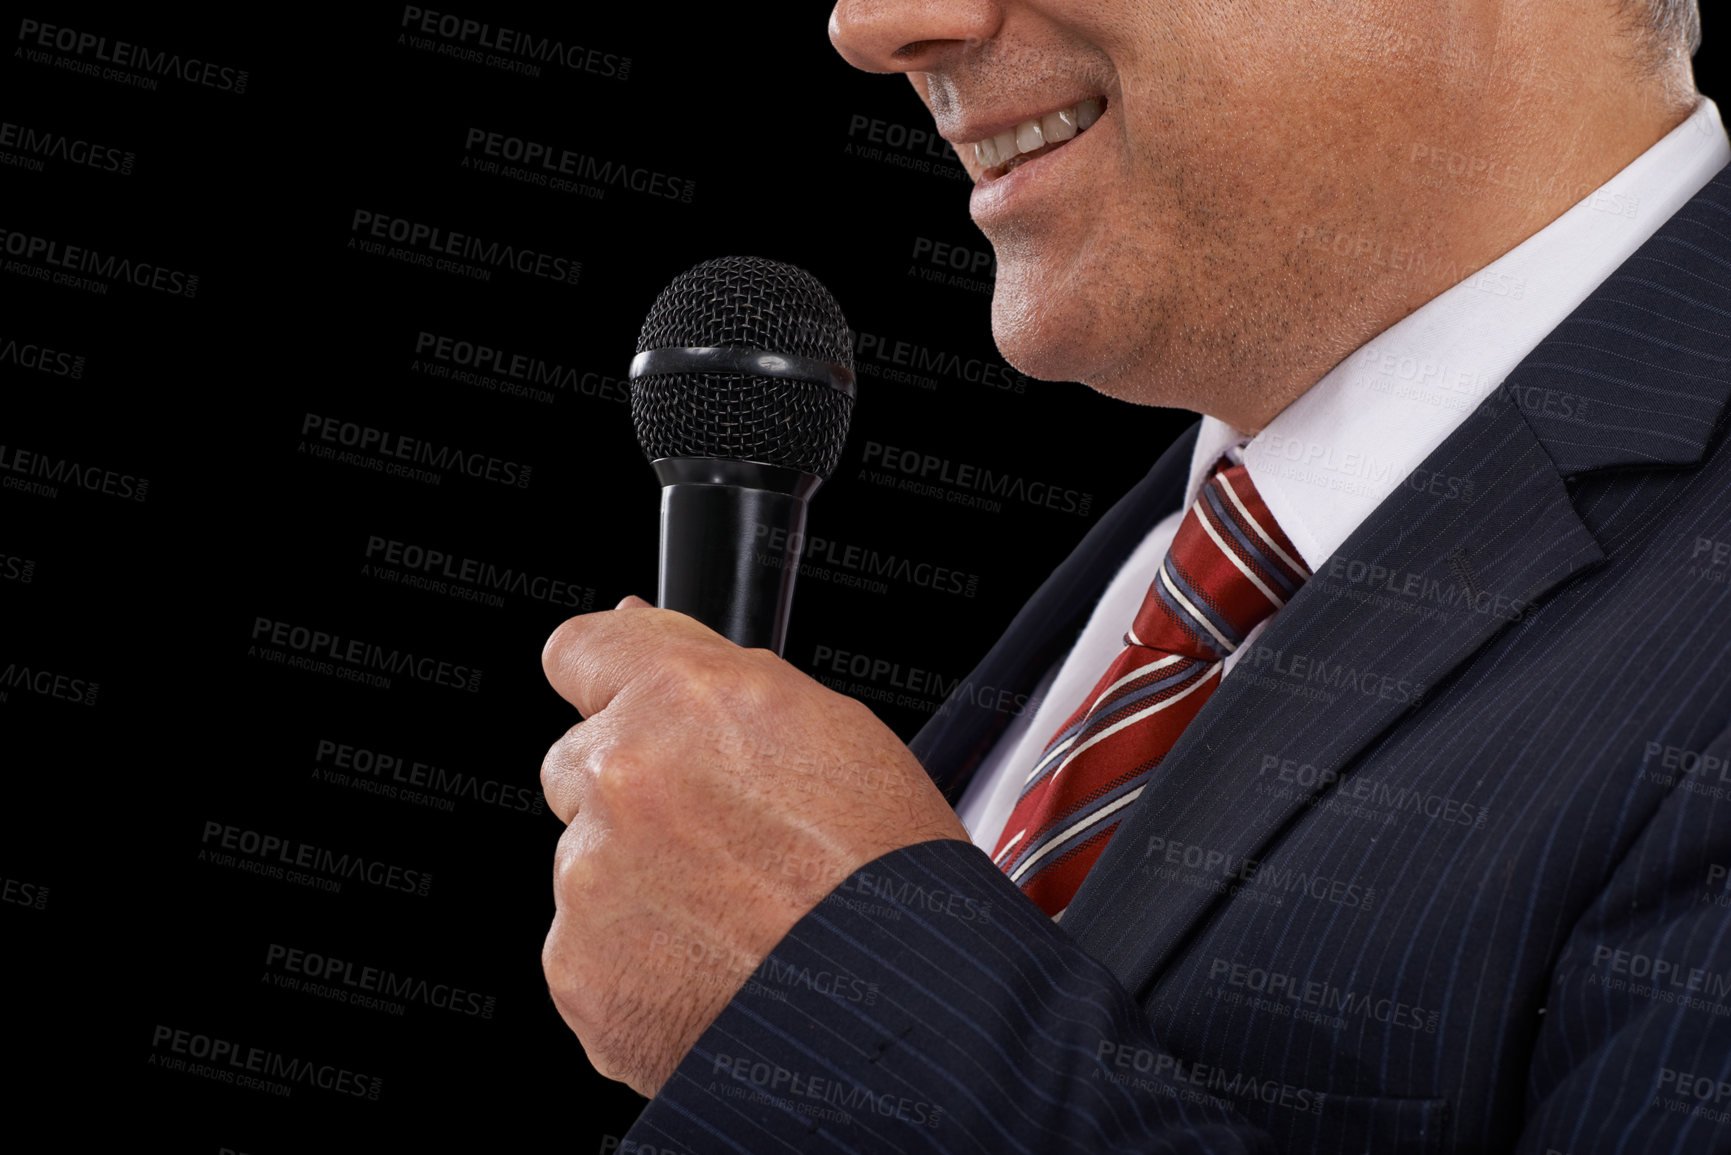 Buy stock photo Cropped image of a mature man in a suit speaking into a microphone